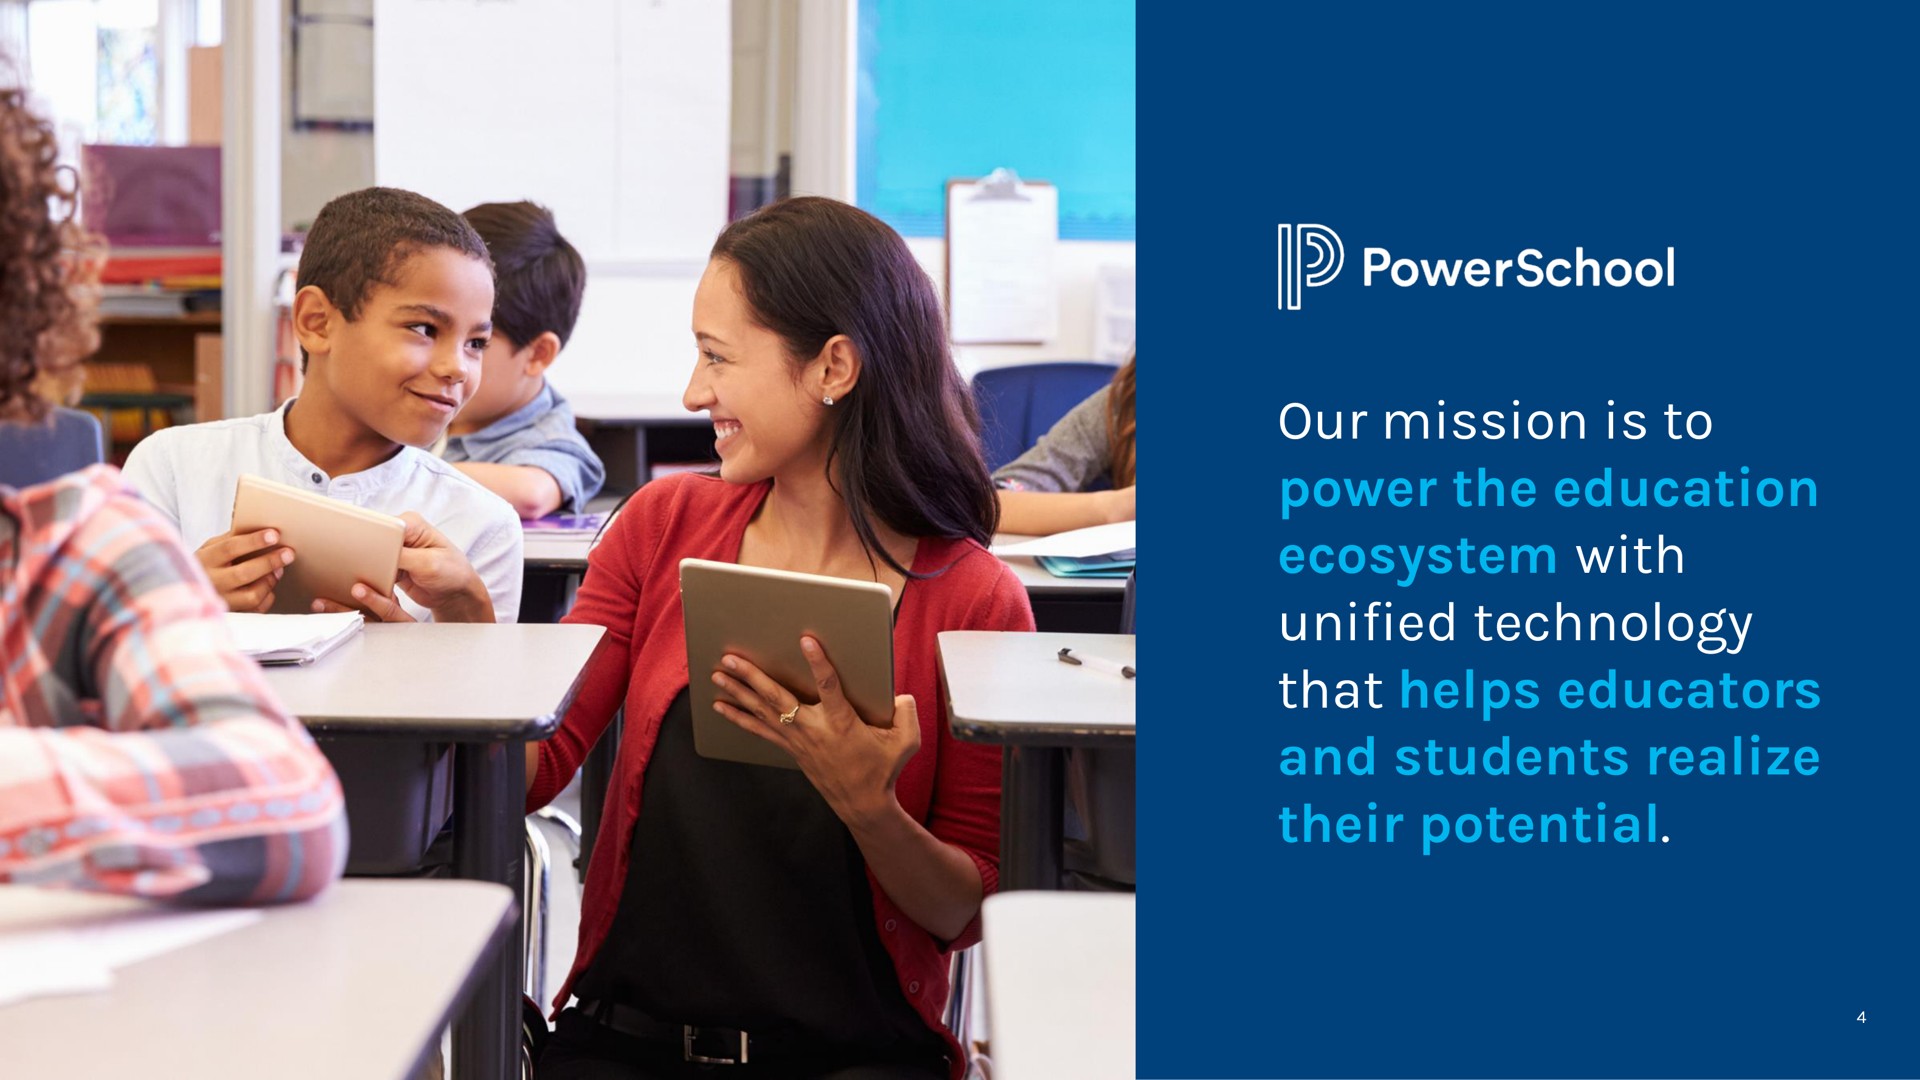 our mission is to power the education ecosystem with unified technology that helps educators and students realize their potential | PowerSchool